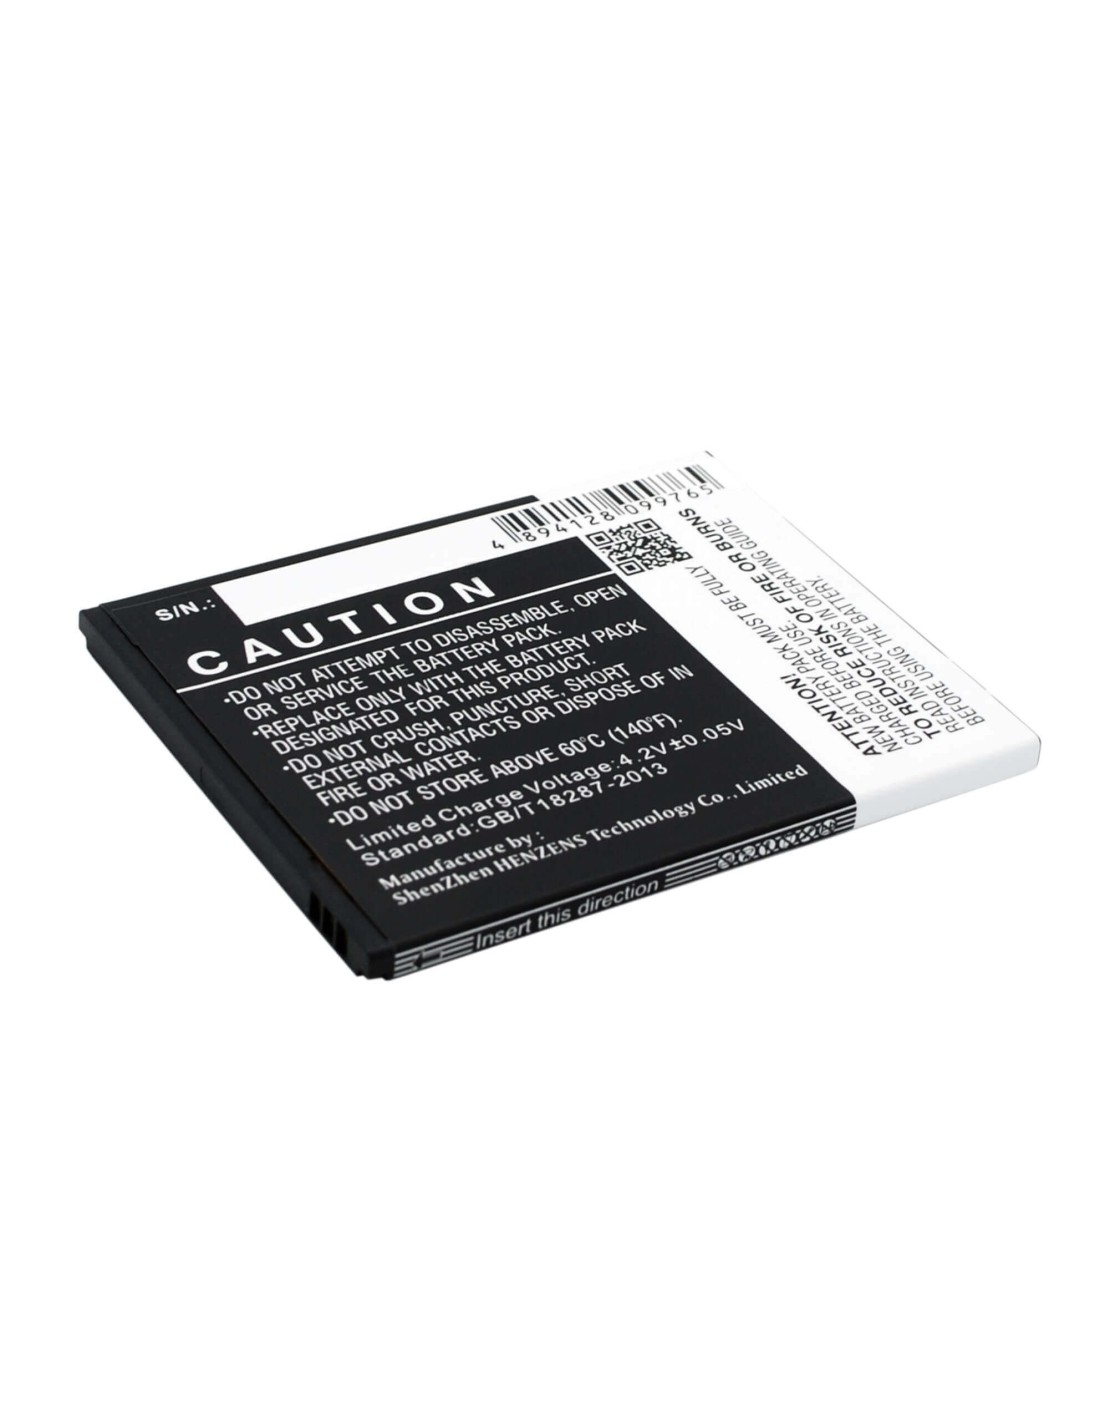 Battery for HASEE X50, W50T, W50TS 3.7V, 2150mAh - 7.96Wh